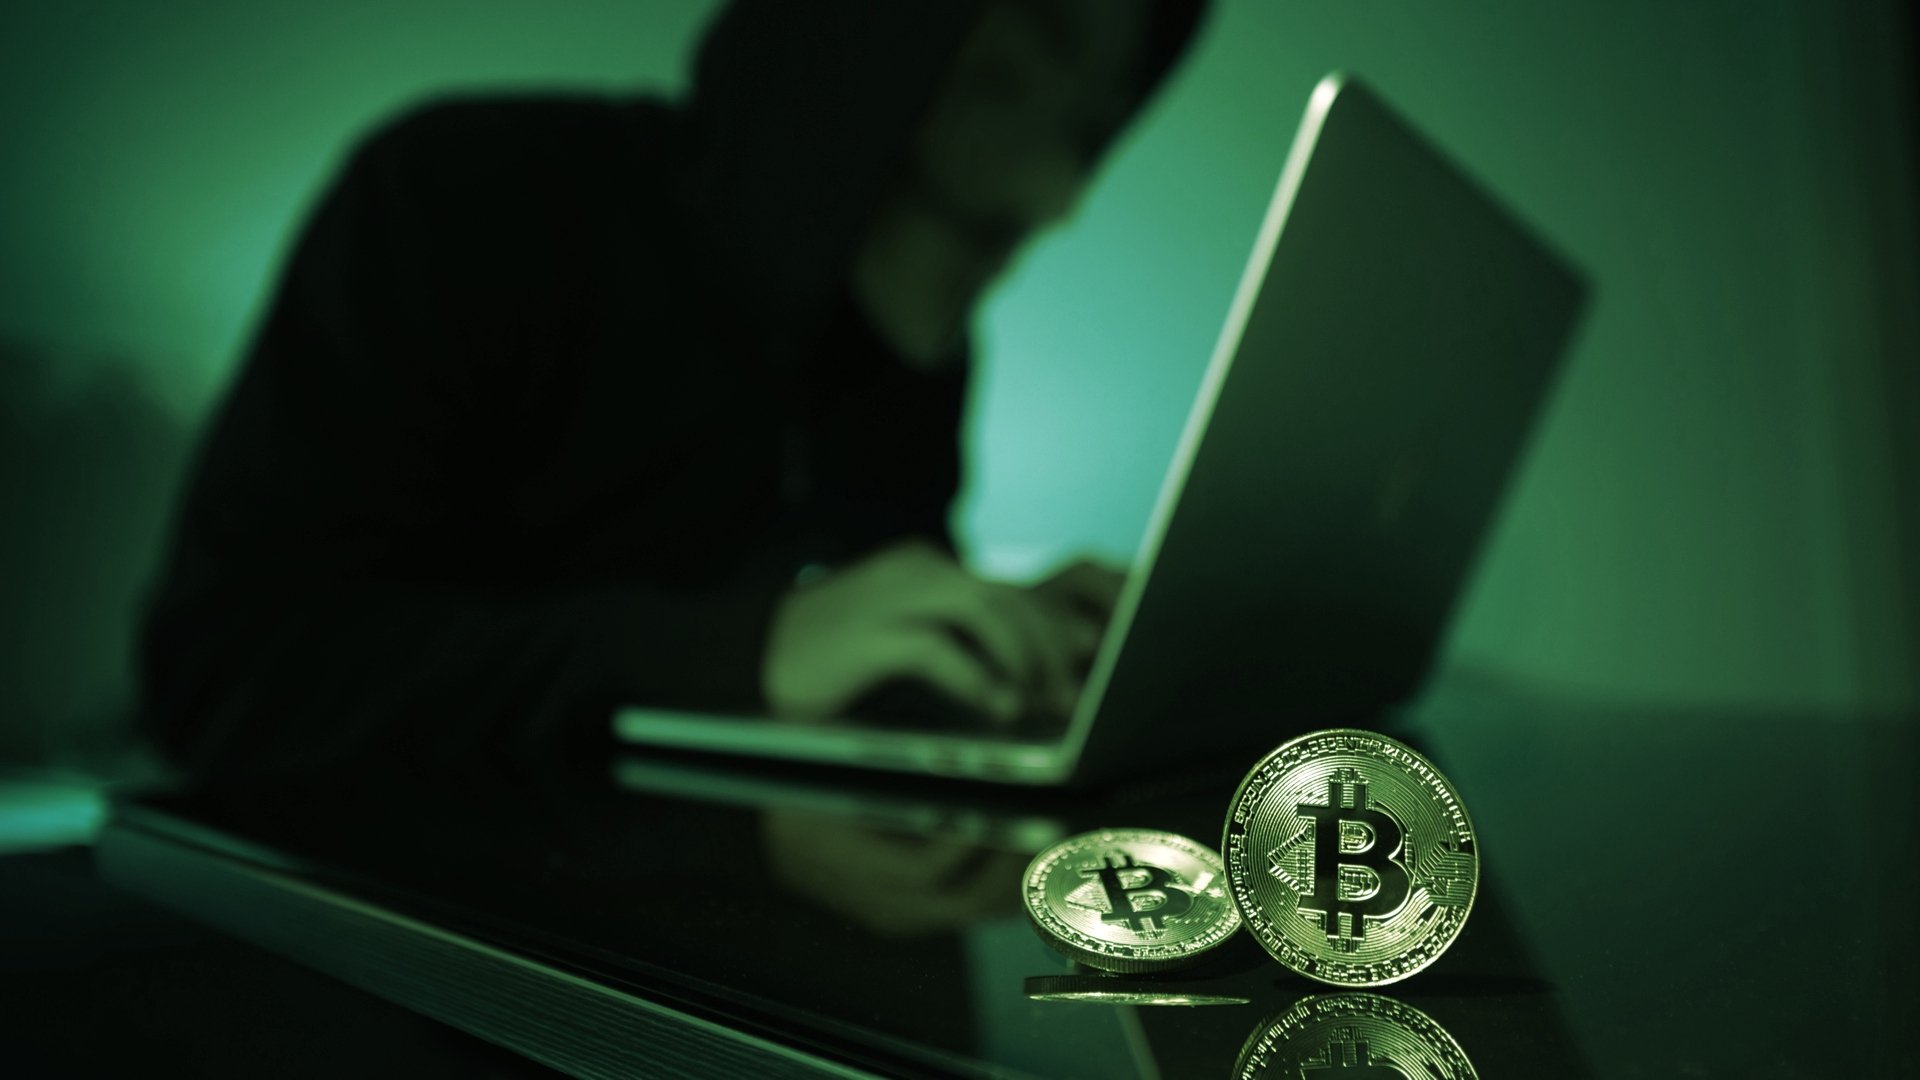 Water Labbu Malware Targets Scammers to Steal Their Ill-Gotten Crypto